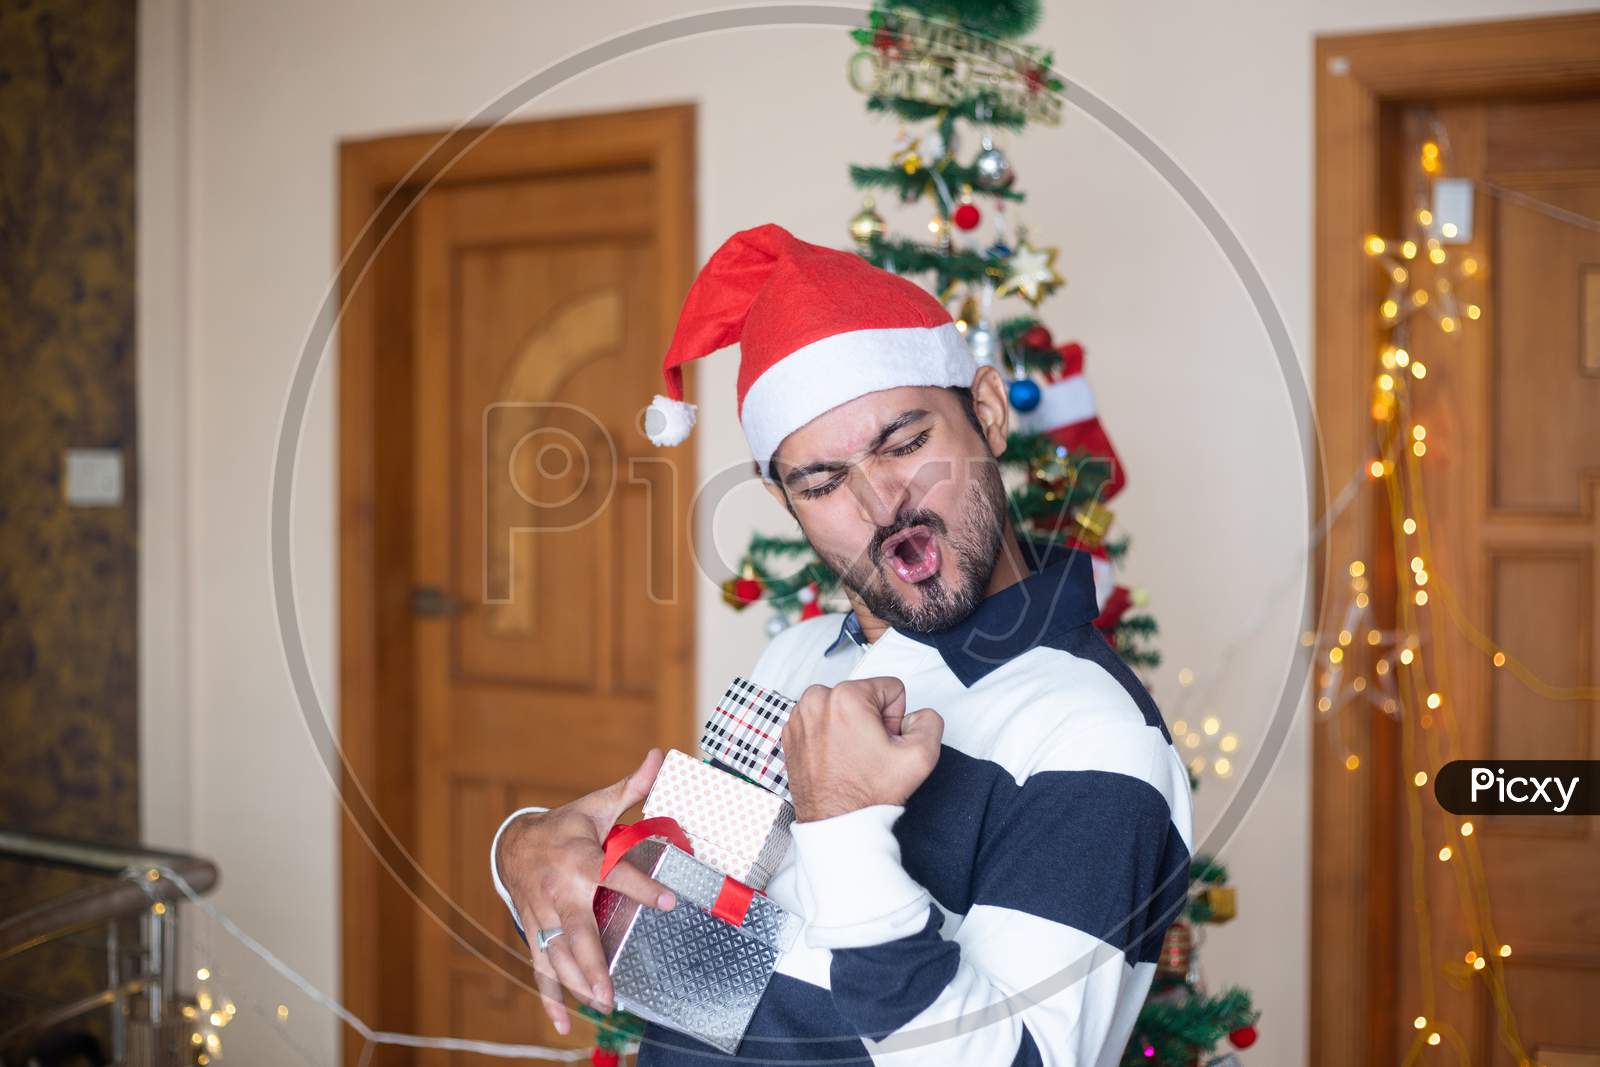 Cheerful Indian Man Wearing Santa Hat Holding Christmas Gift Boxes Or Presents Enjoys Holiday Season At Home, Extreme Happiness, Emotions, Copy Space